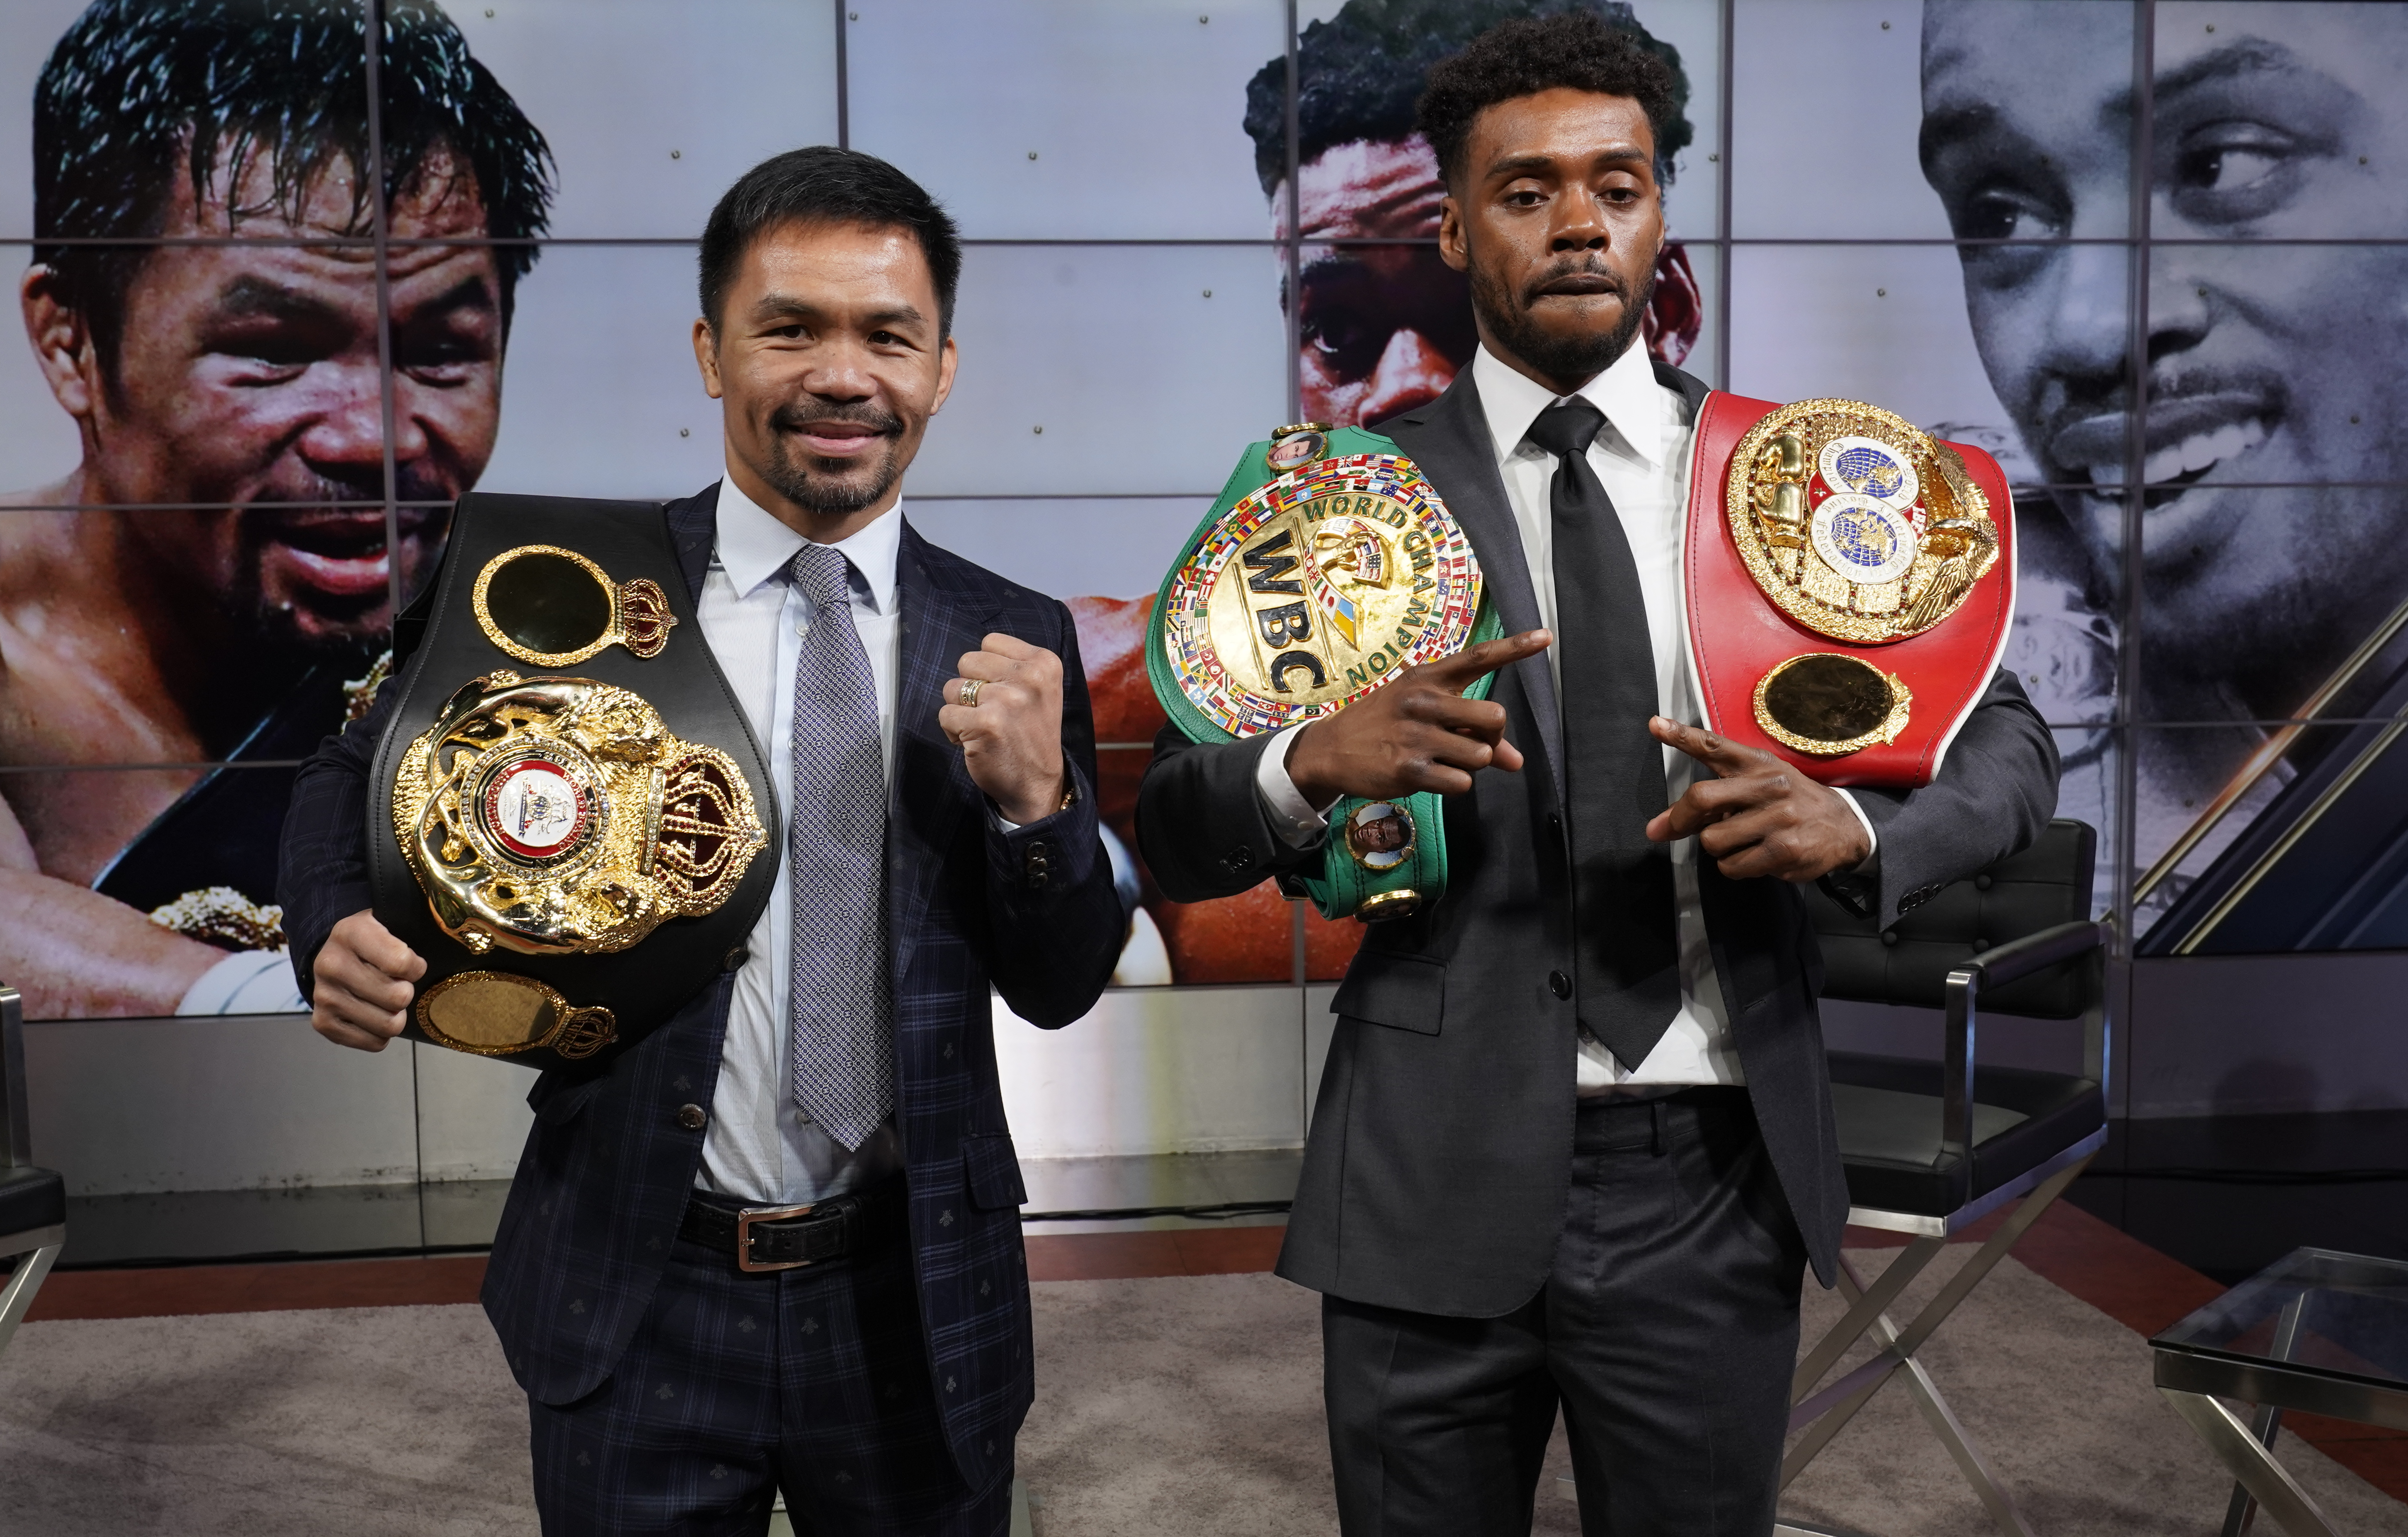 What happened to Errol Spence Jr., and why isnt he fighting Pacquiao?